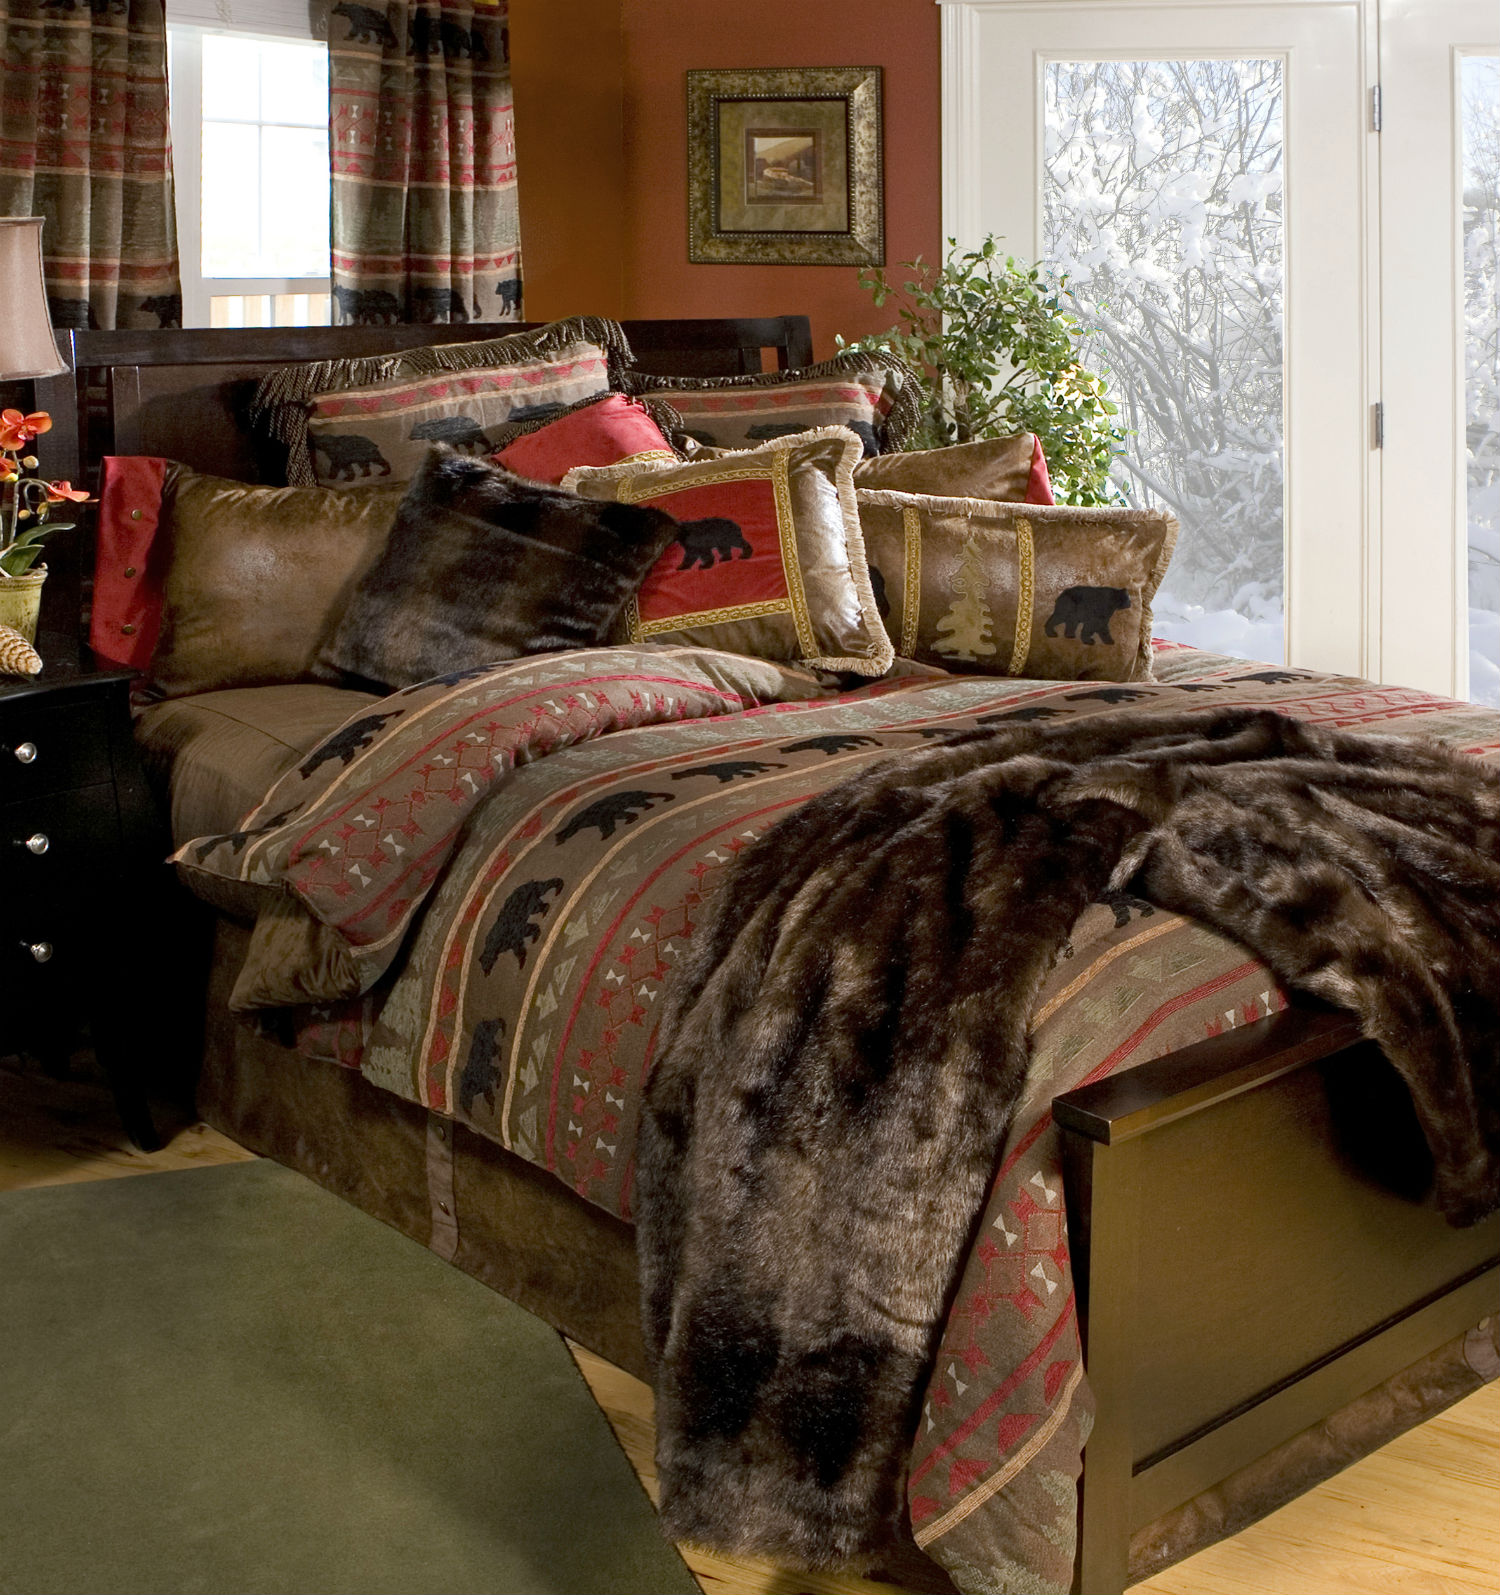 Bear Country by Carstens Lodge Bedding - BeddingSuperStore.com